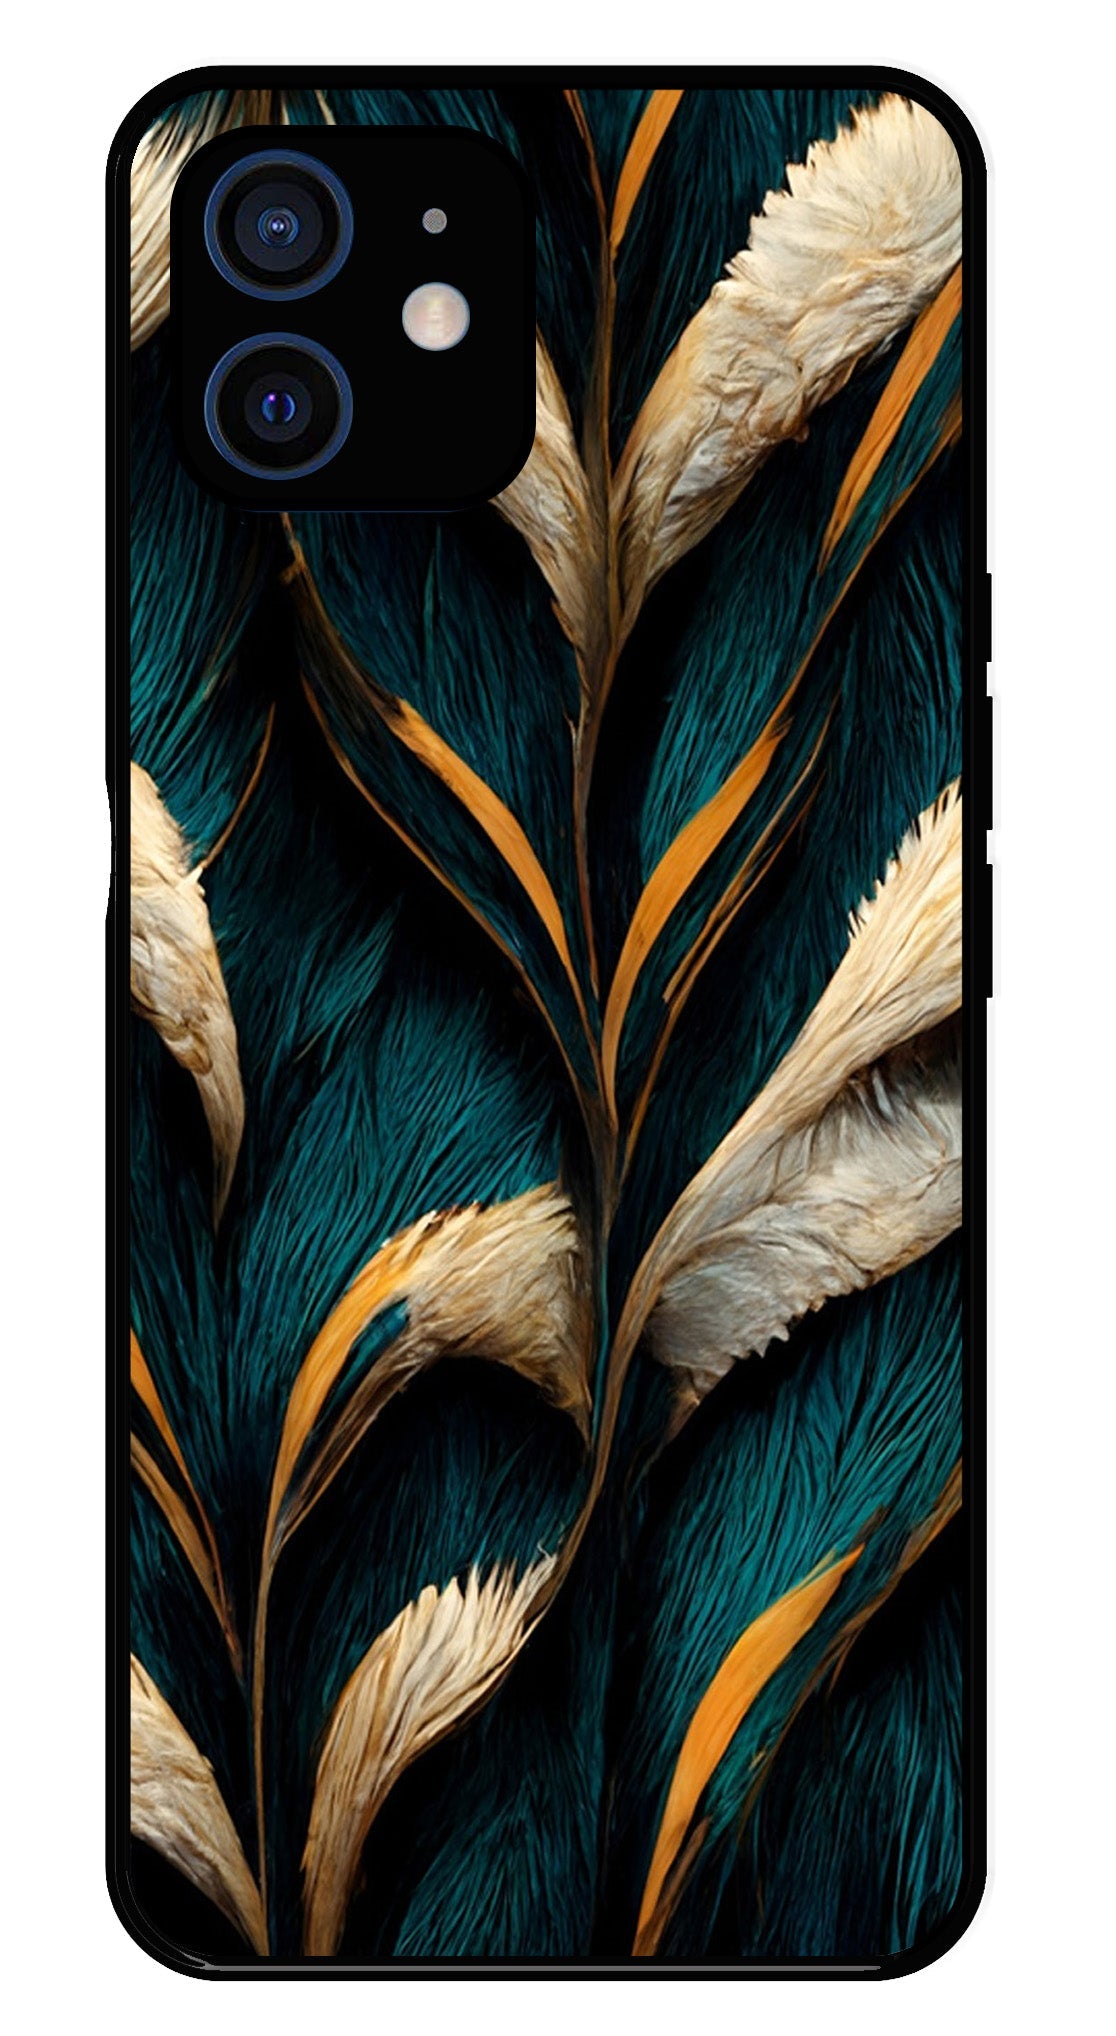 Feathers Metal Mobile Case for iPhone 12 Mini